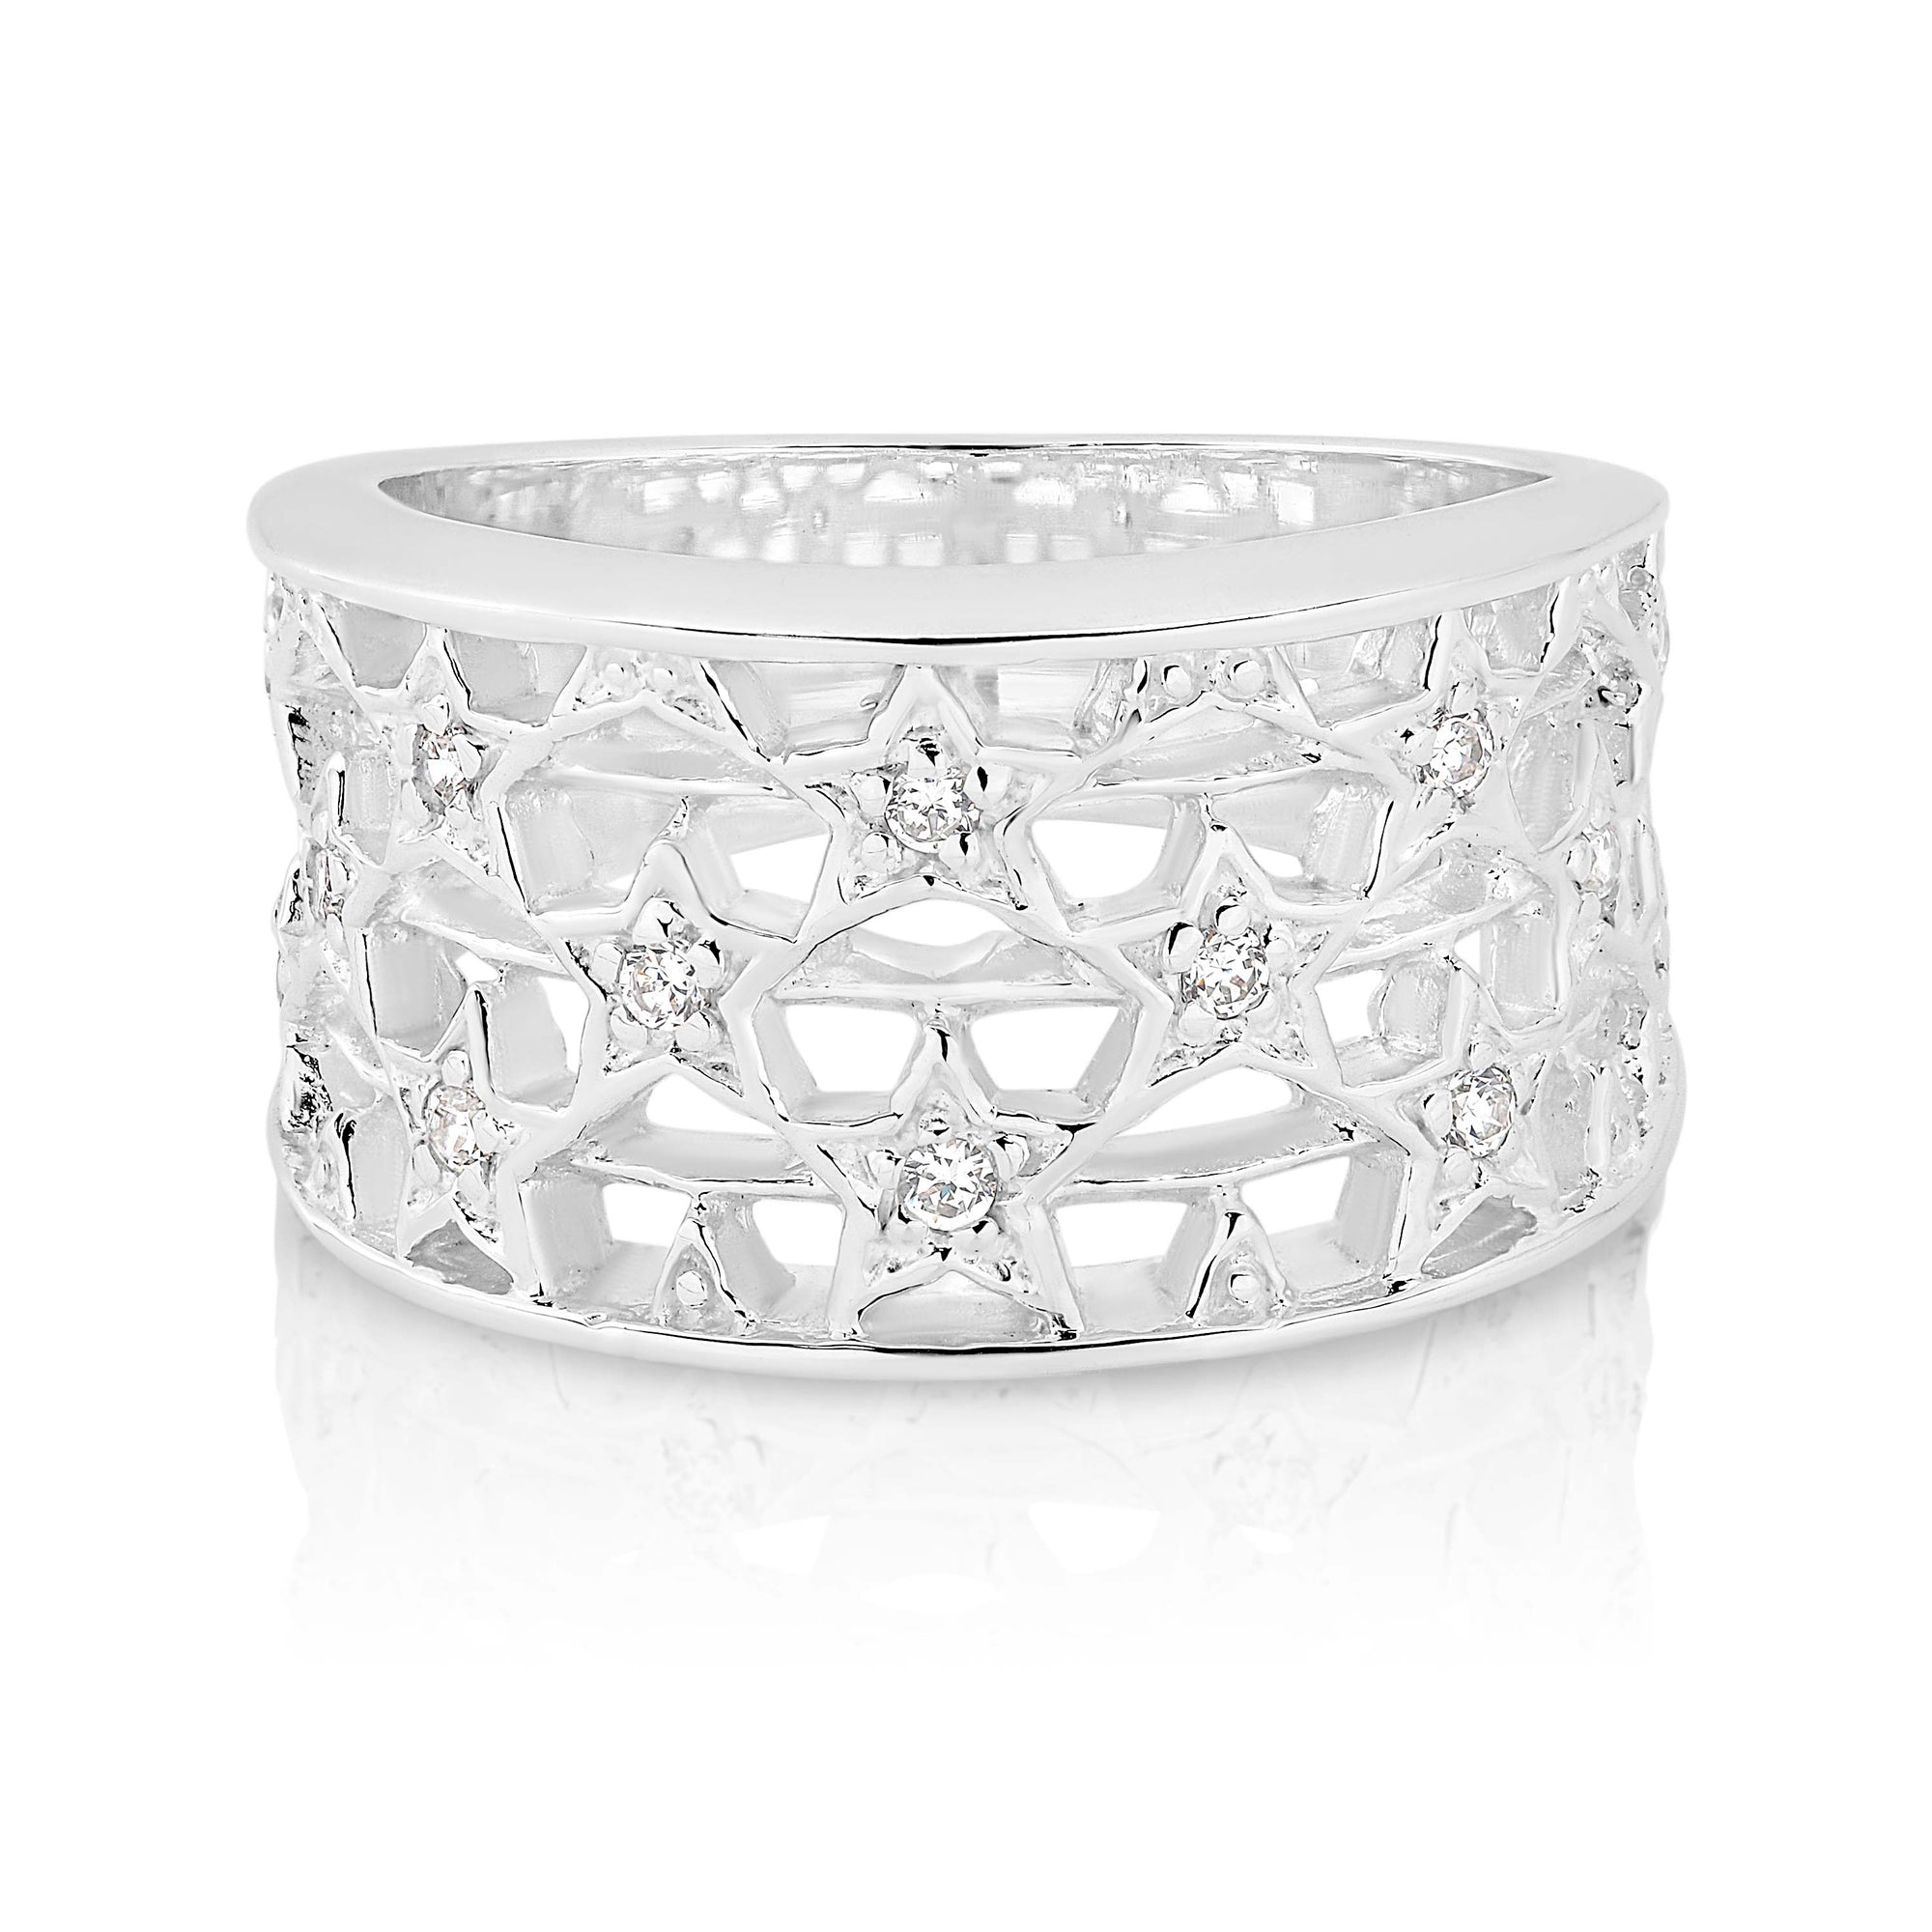 Filigree Ring with Star set Cubic Zirconias in Sterling Silver